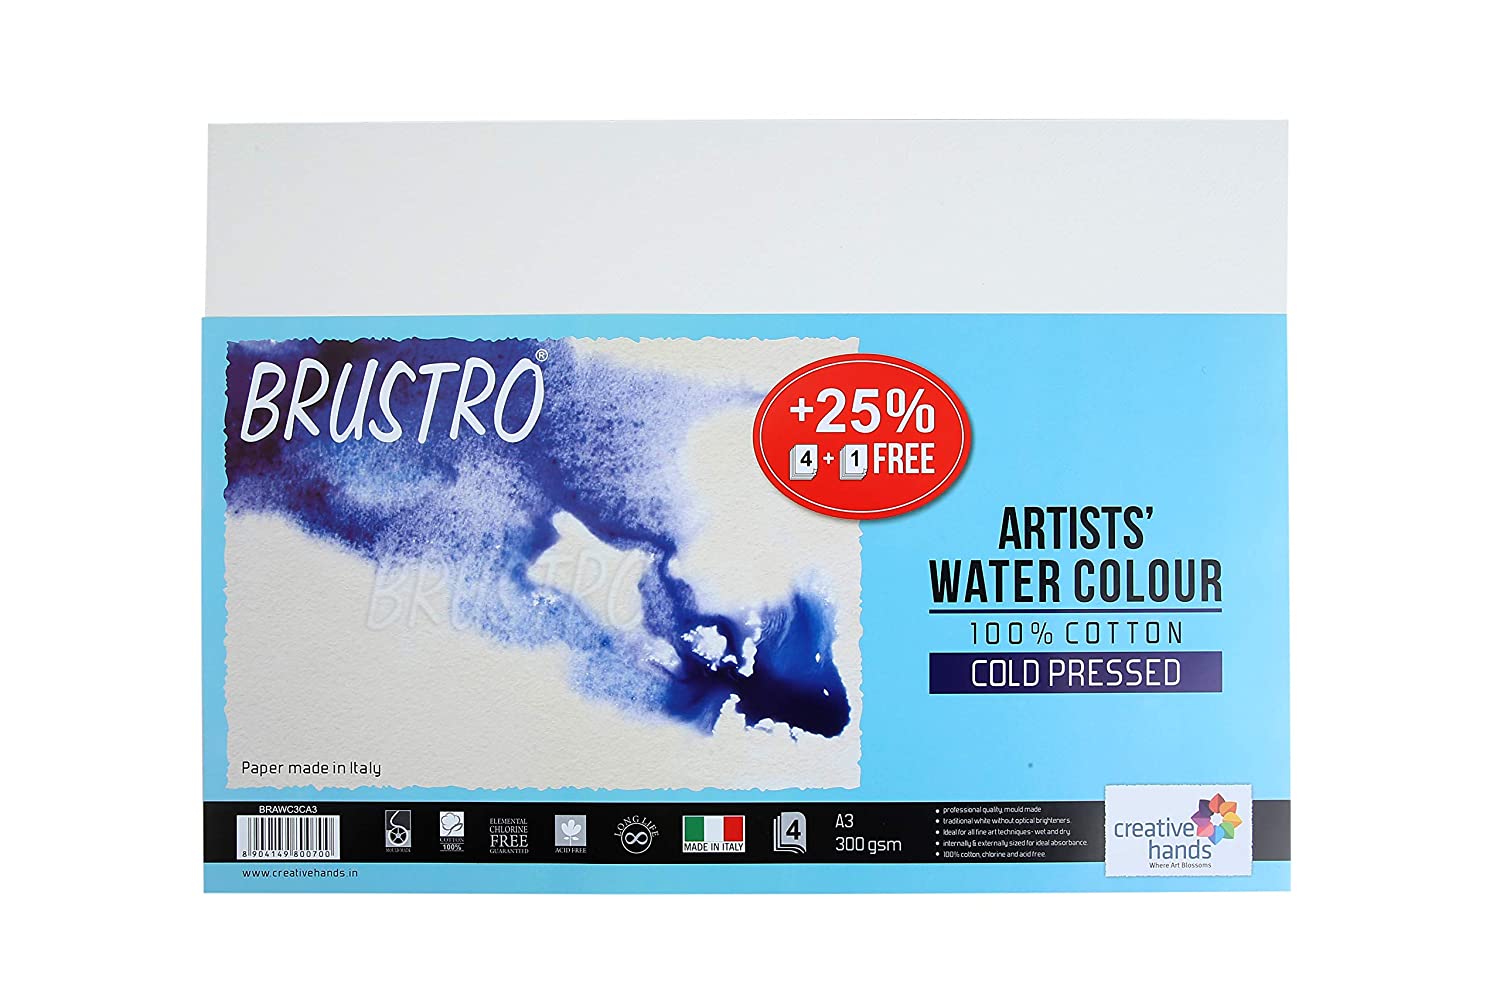 Scholar Water Color Pad A5 12st 300gsm WCW2 CP - Starbox